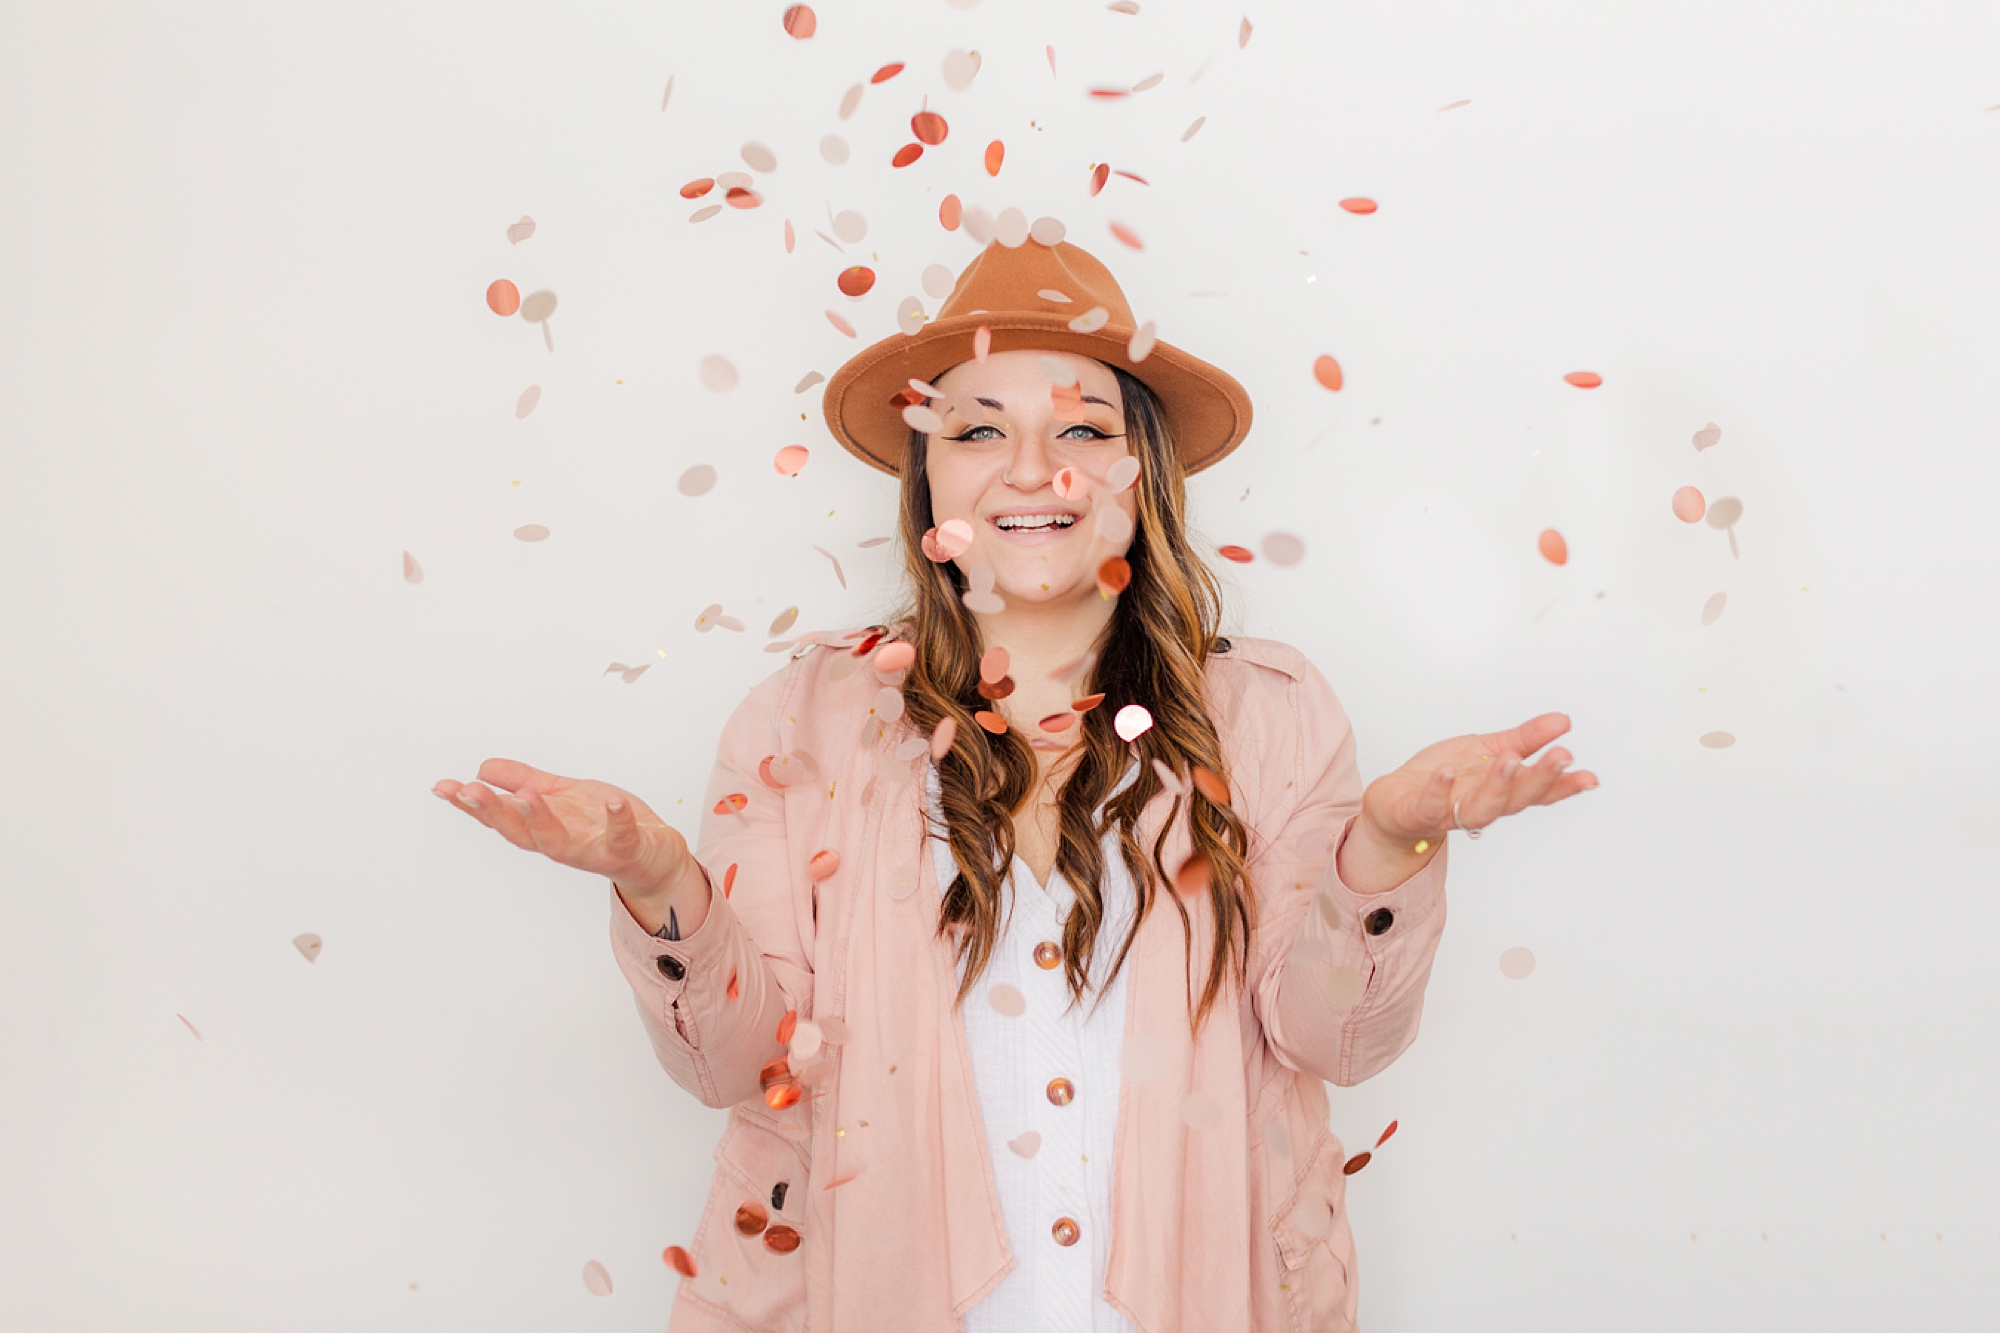 business owner tosses confetti during branding photos